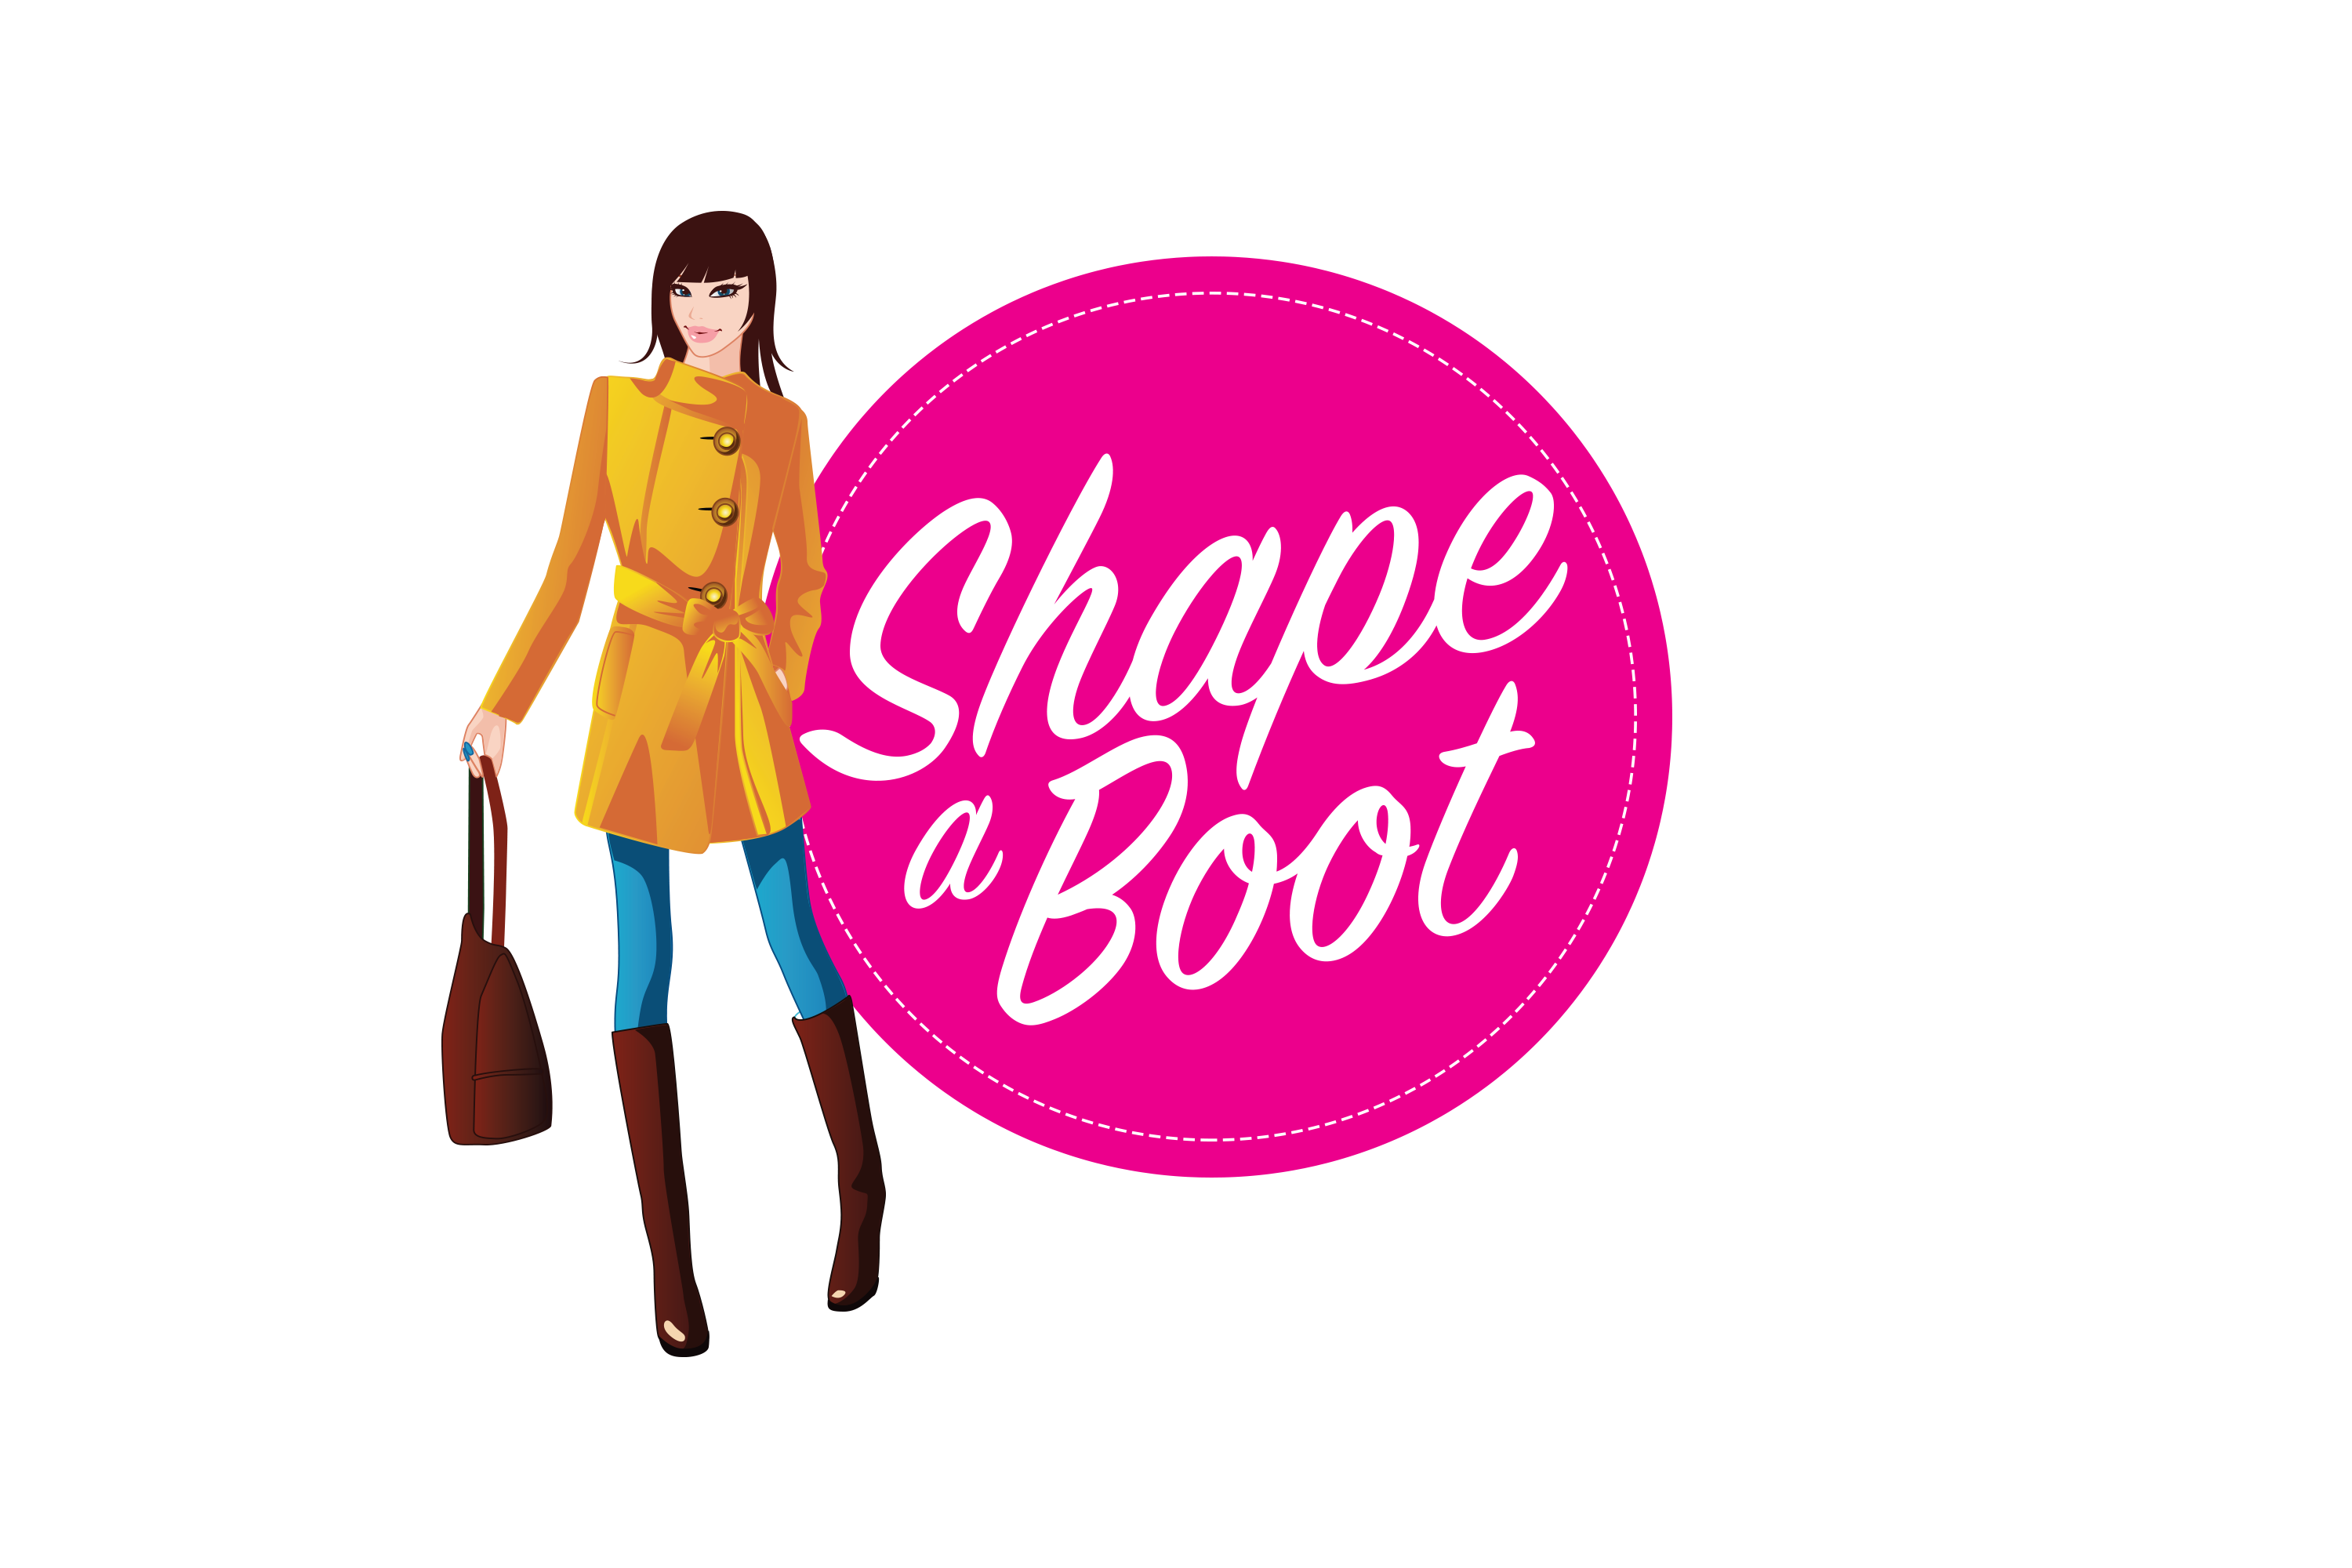 Shape-A-Boot is a small strip that goes around the inside of the boot and is designed to reduce the width of the opening of the boot.